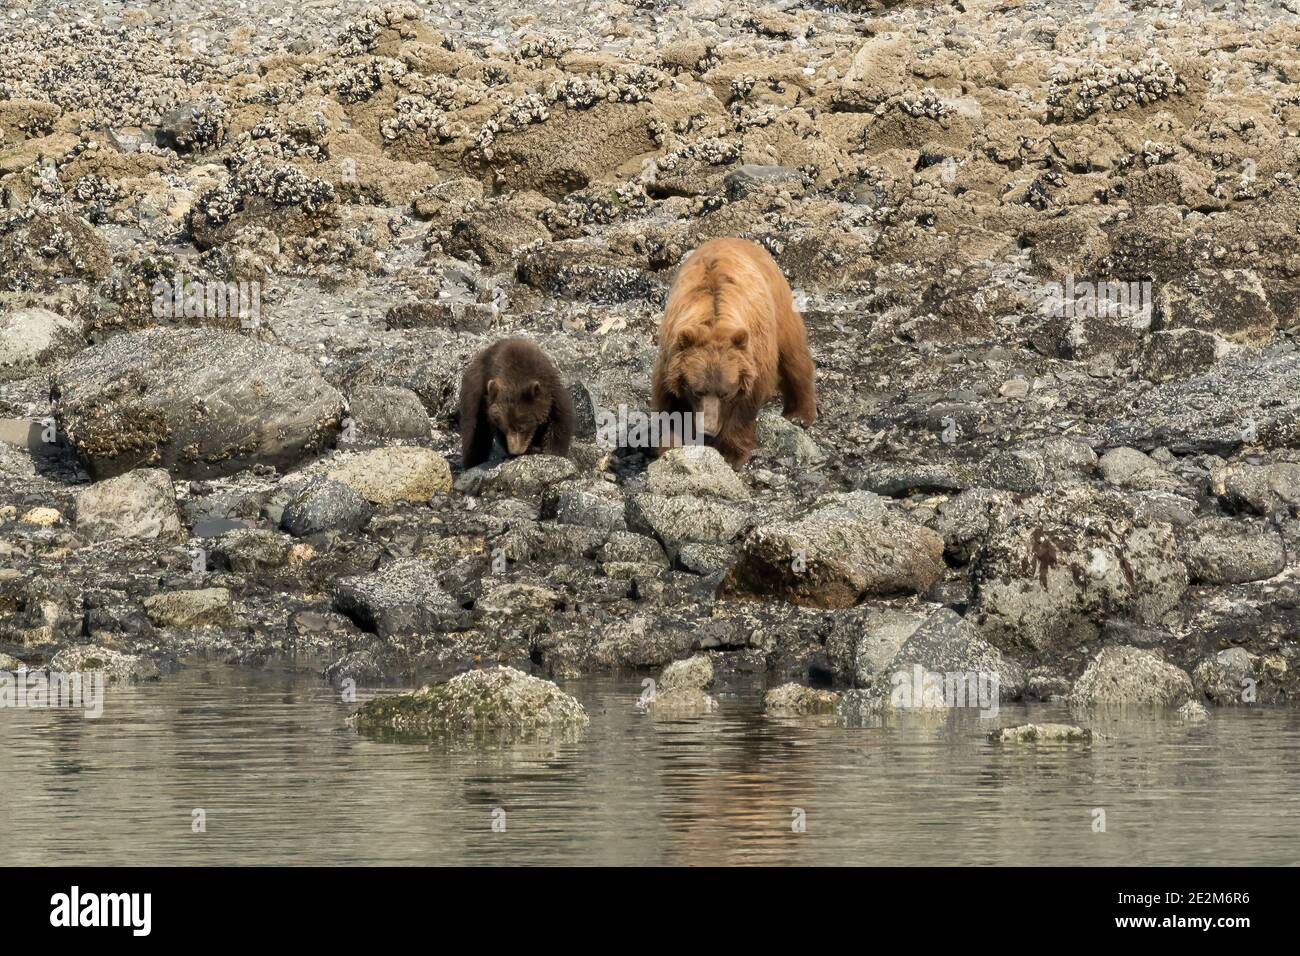 A coastal brown or grizzly bear (Ursus arctos horribilis) mother and cub search for food along the ocean shore in Alaska. Stock Photo